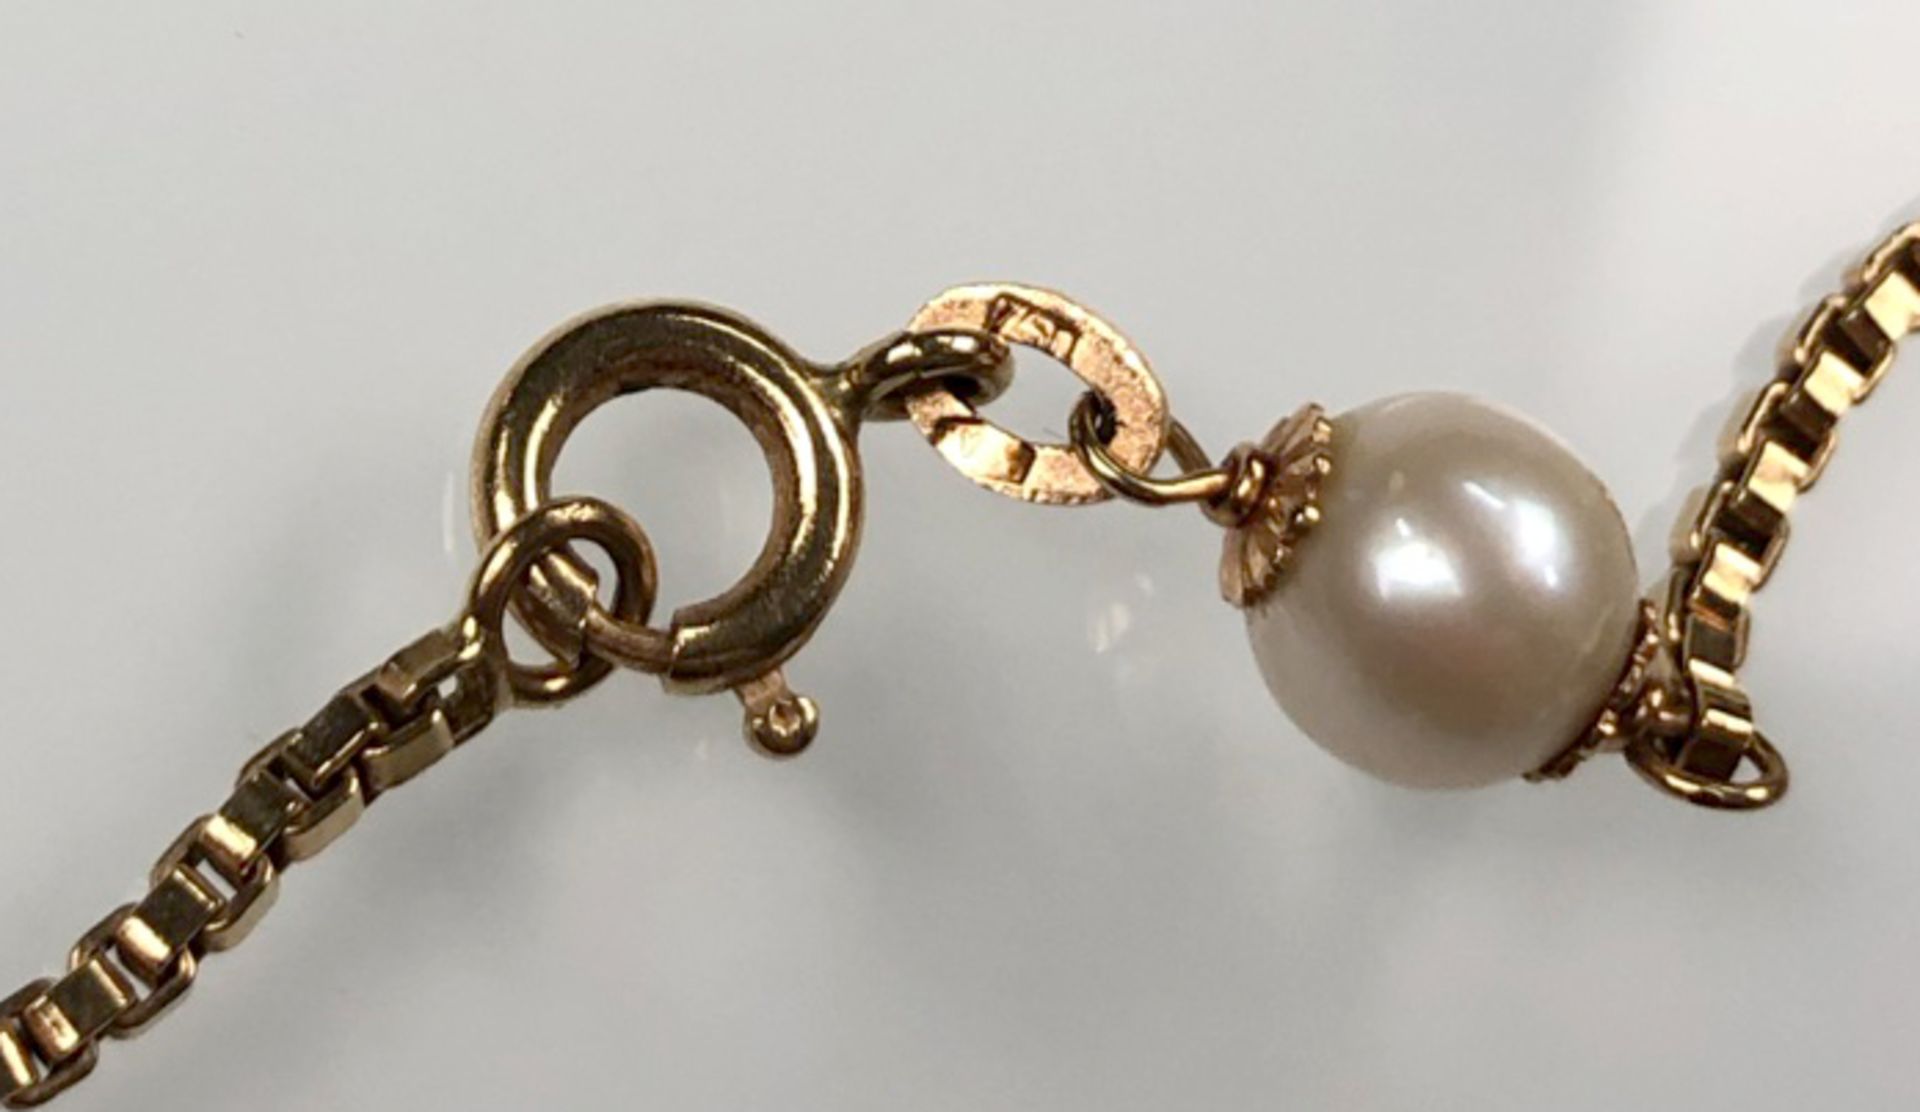 Necklace. Yellow gold 750 with cultured pearls. Gross 27.1 grams. - Image 6 of 10